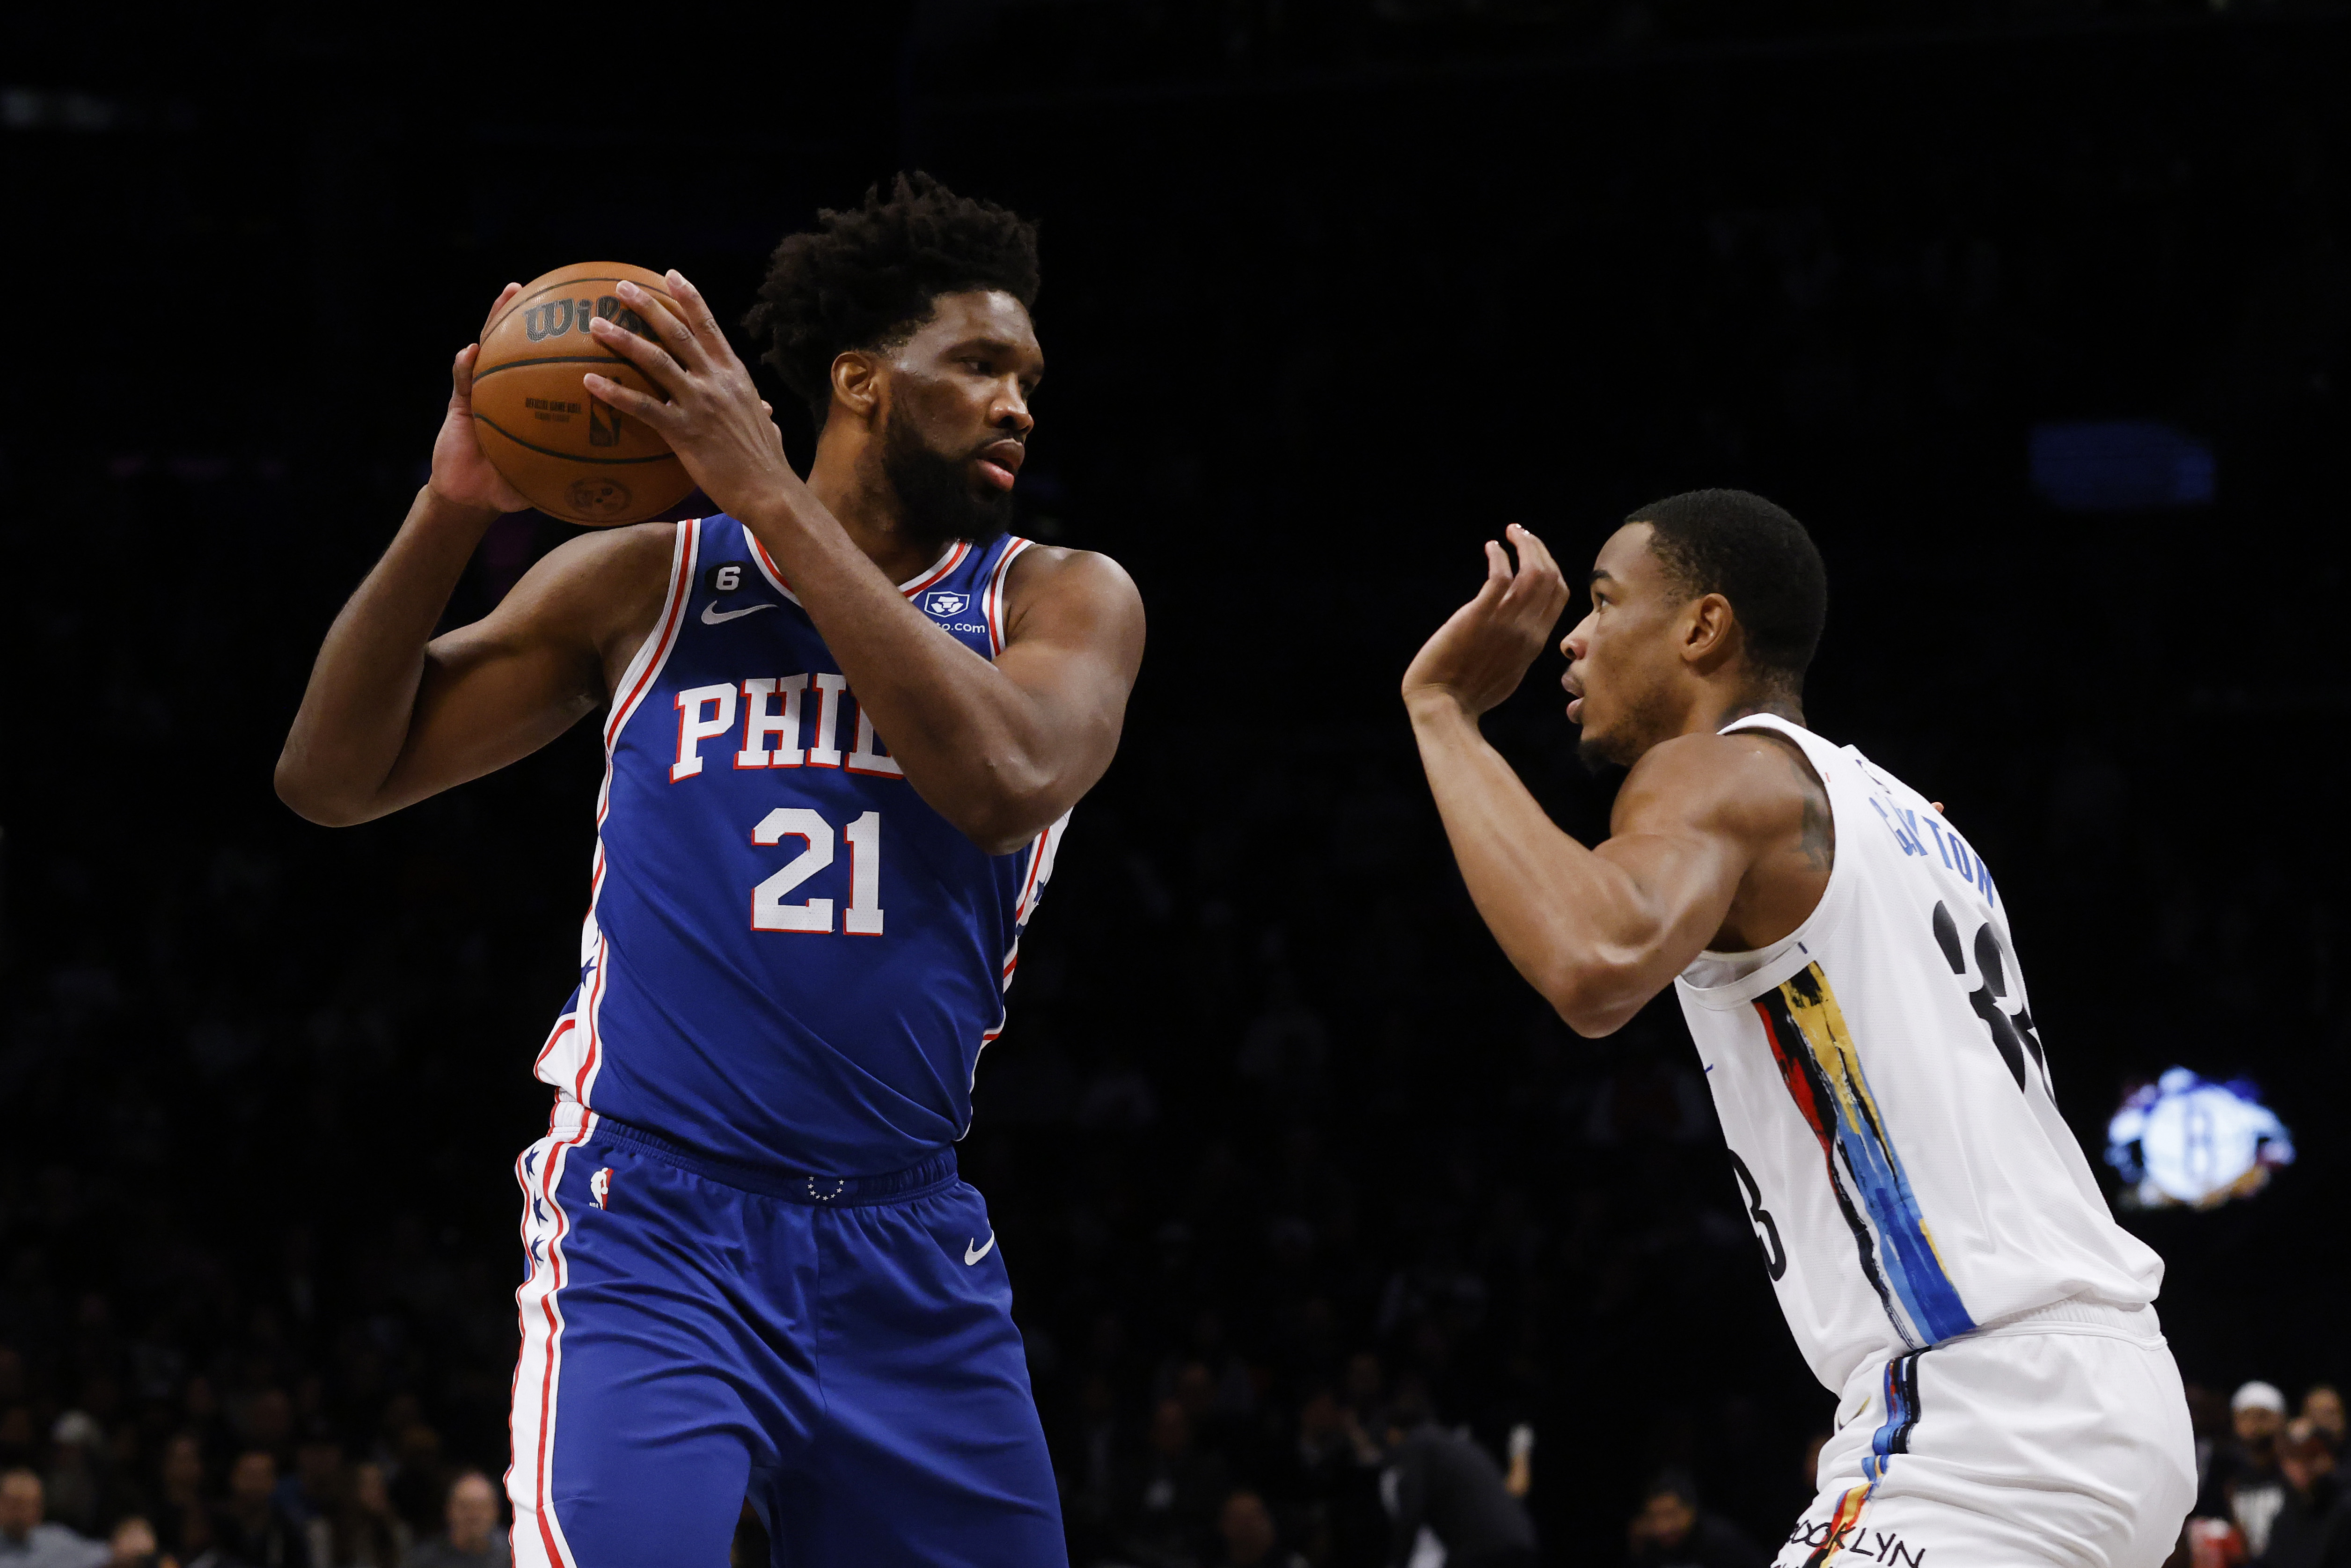 NBA Playoffs Odds: 76ers vs Nets Lines, Odds to Win Series, Spreads